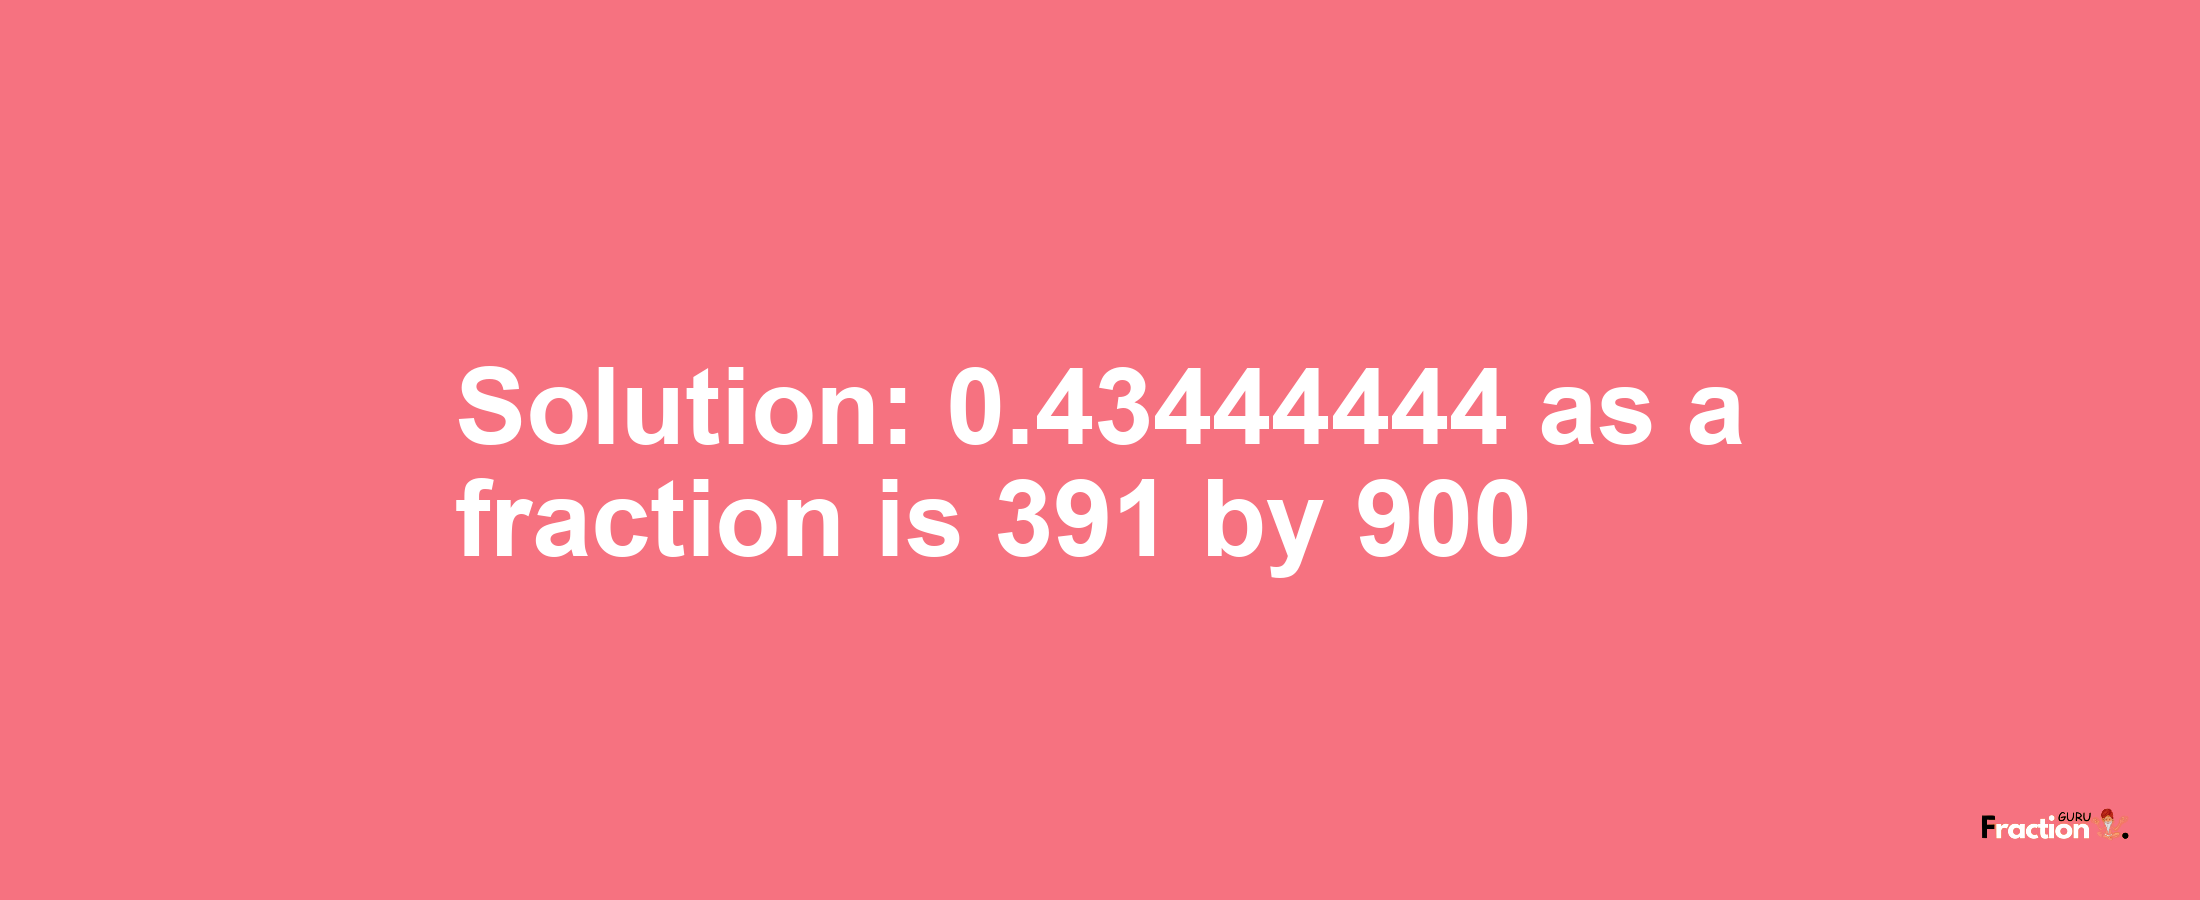 Solution:0.43444444 as a fraction is 391/900